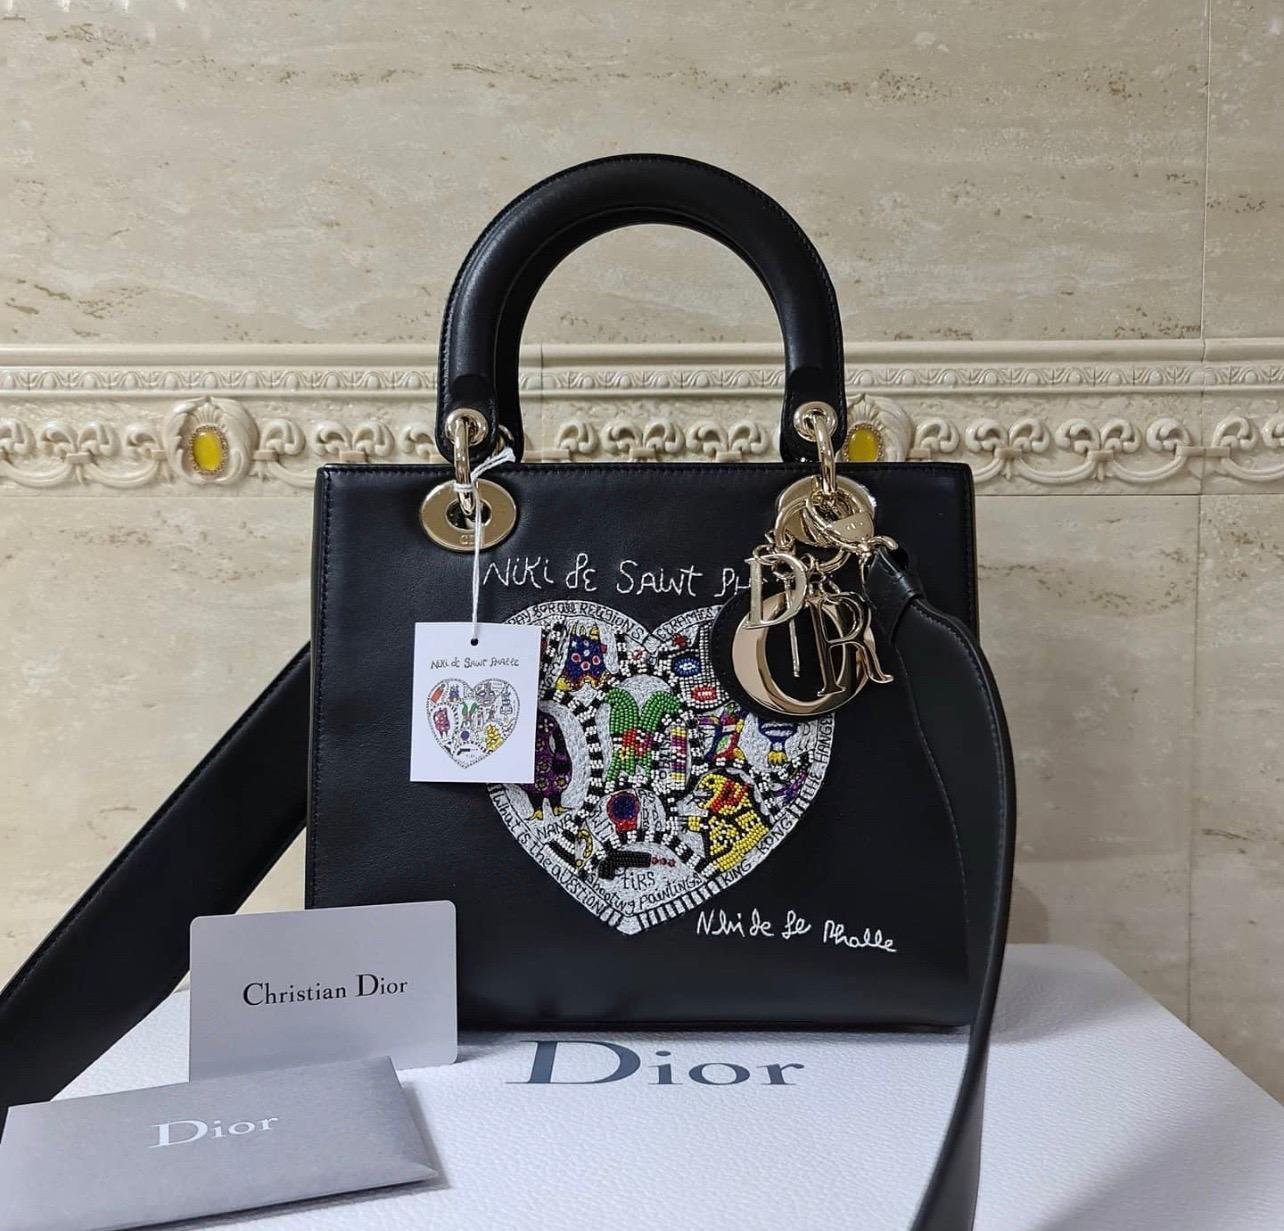    Just when you thought Dior’s most iconic accessory couldn’t get any more elegant, the brand presents us with a Lady Dior art and icon to the next level. Usually depicted in either lambskin or patent cannage leather, Dior’s unique seasonal Lady